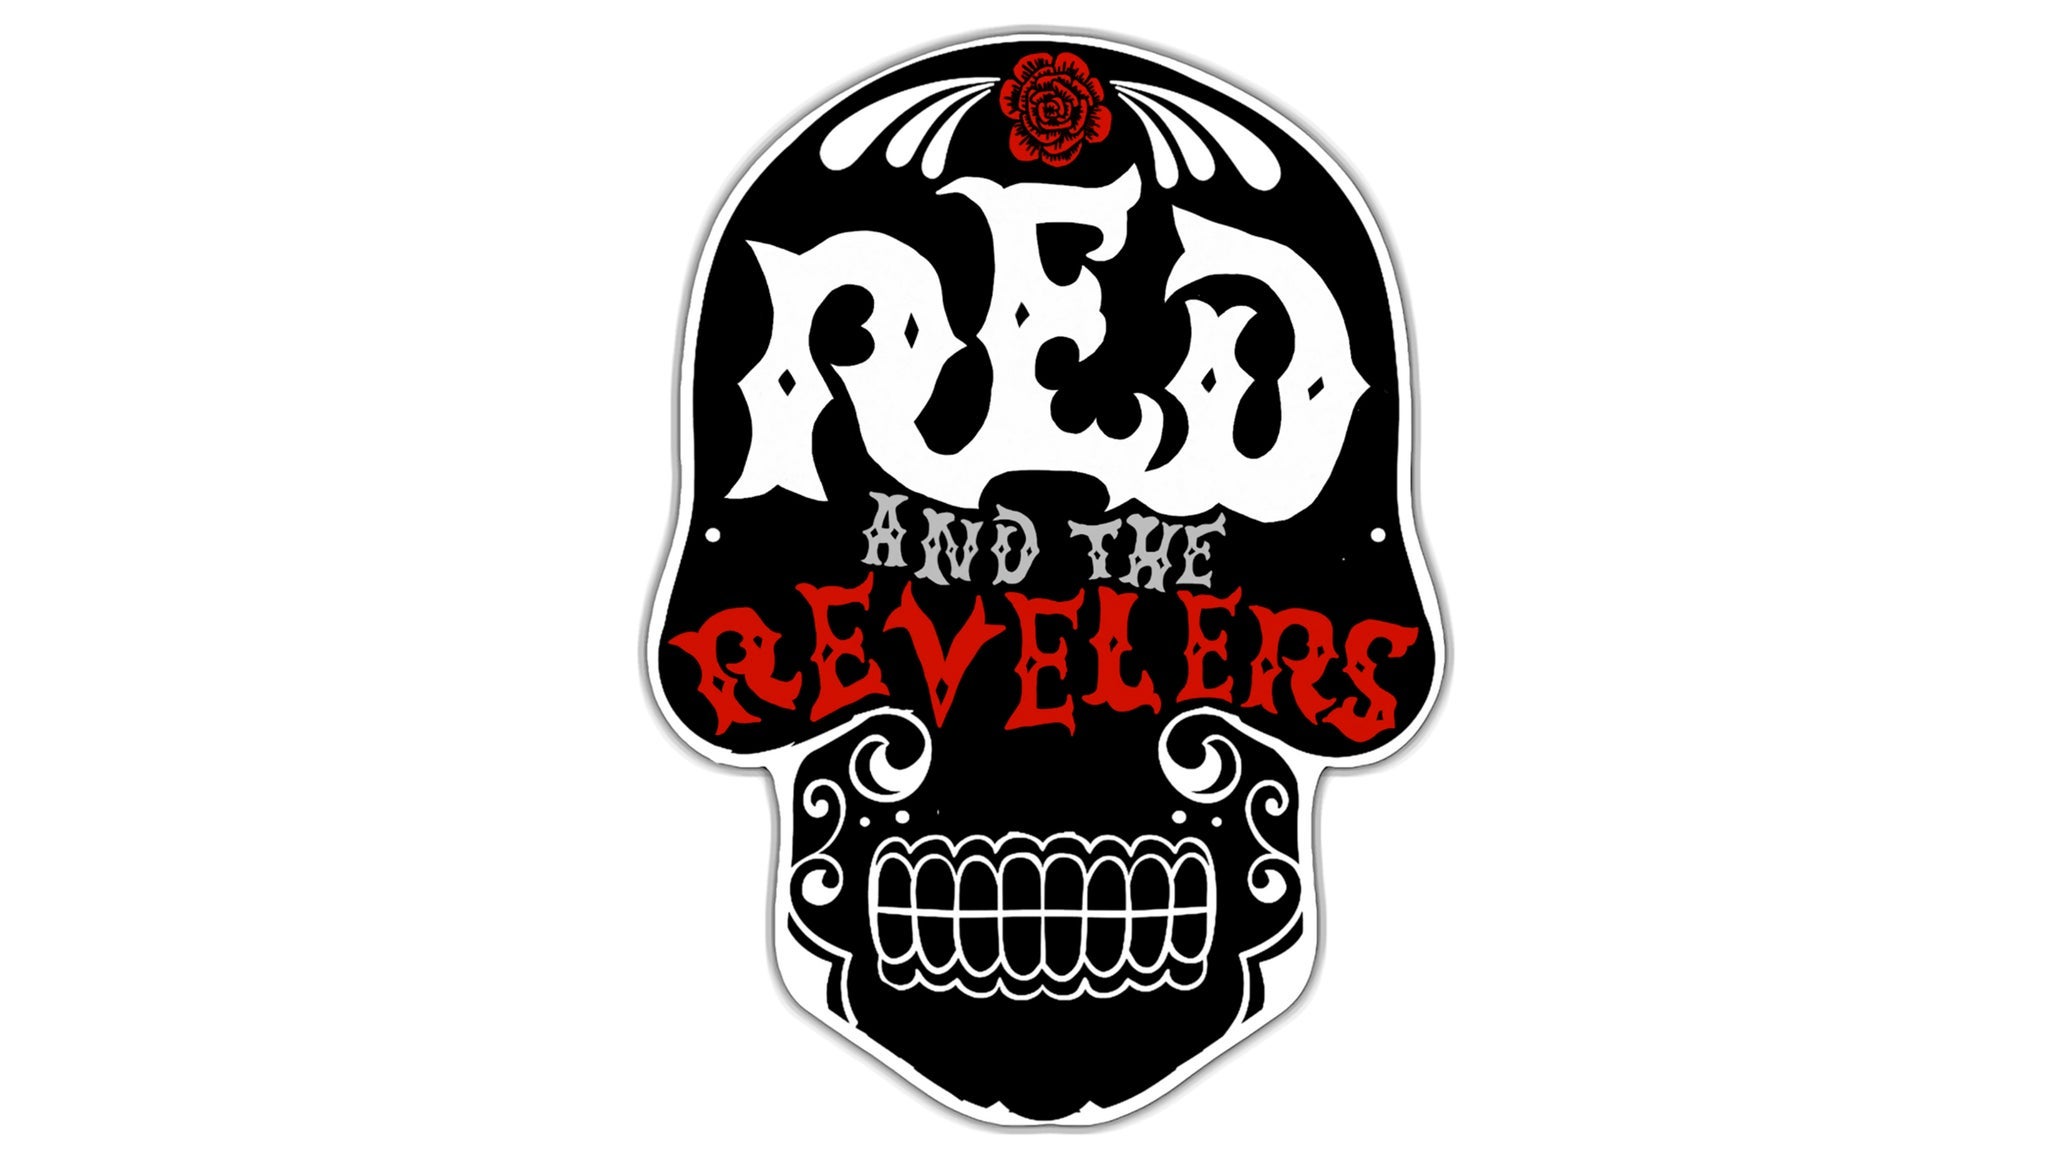 Red and the Revelers